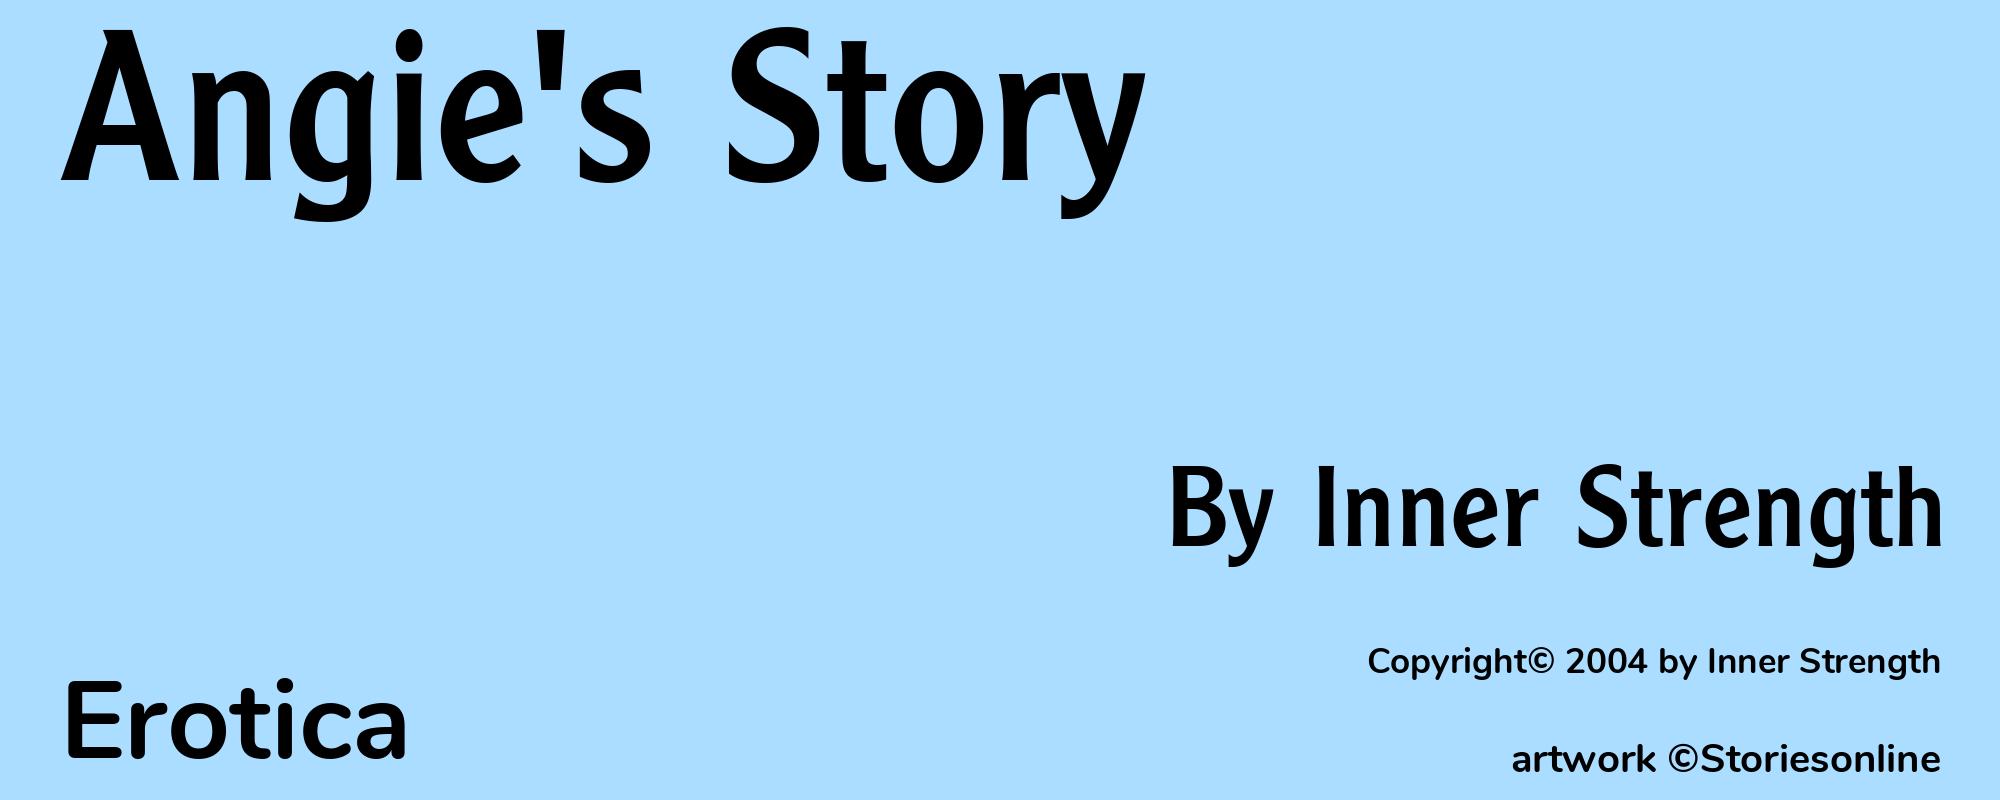 Angie's Story - Cover